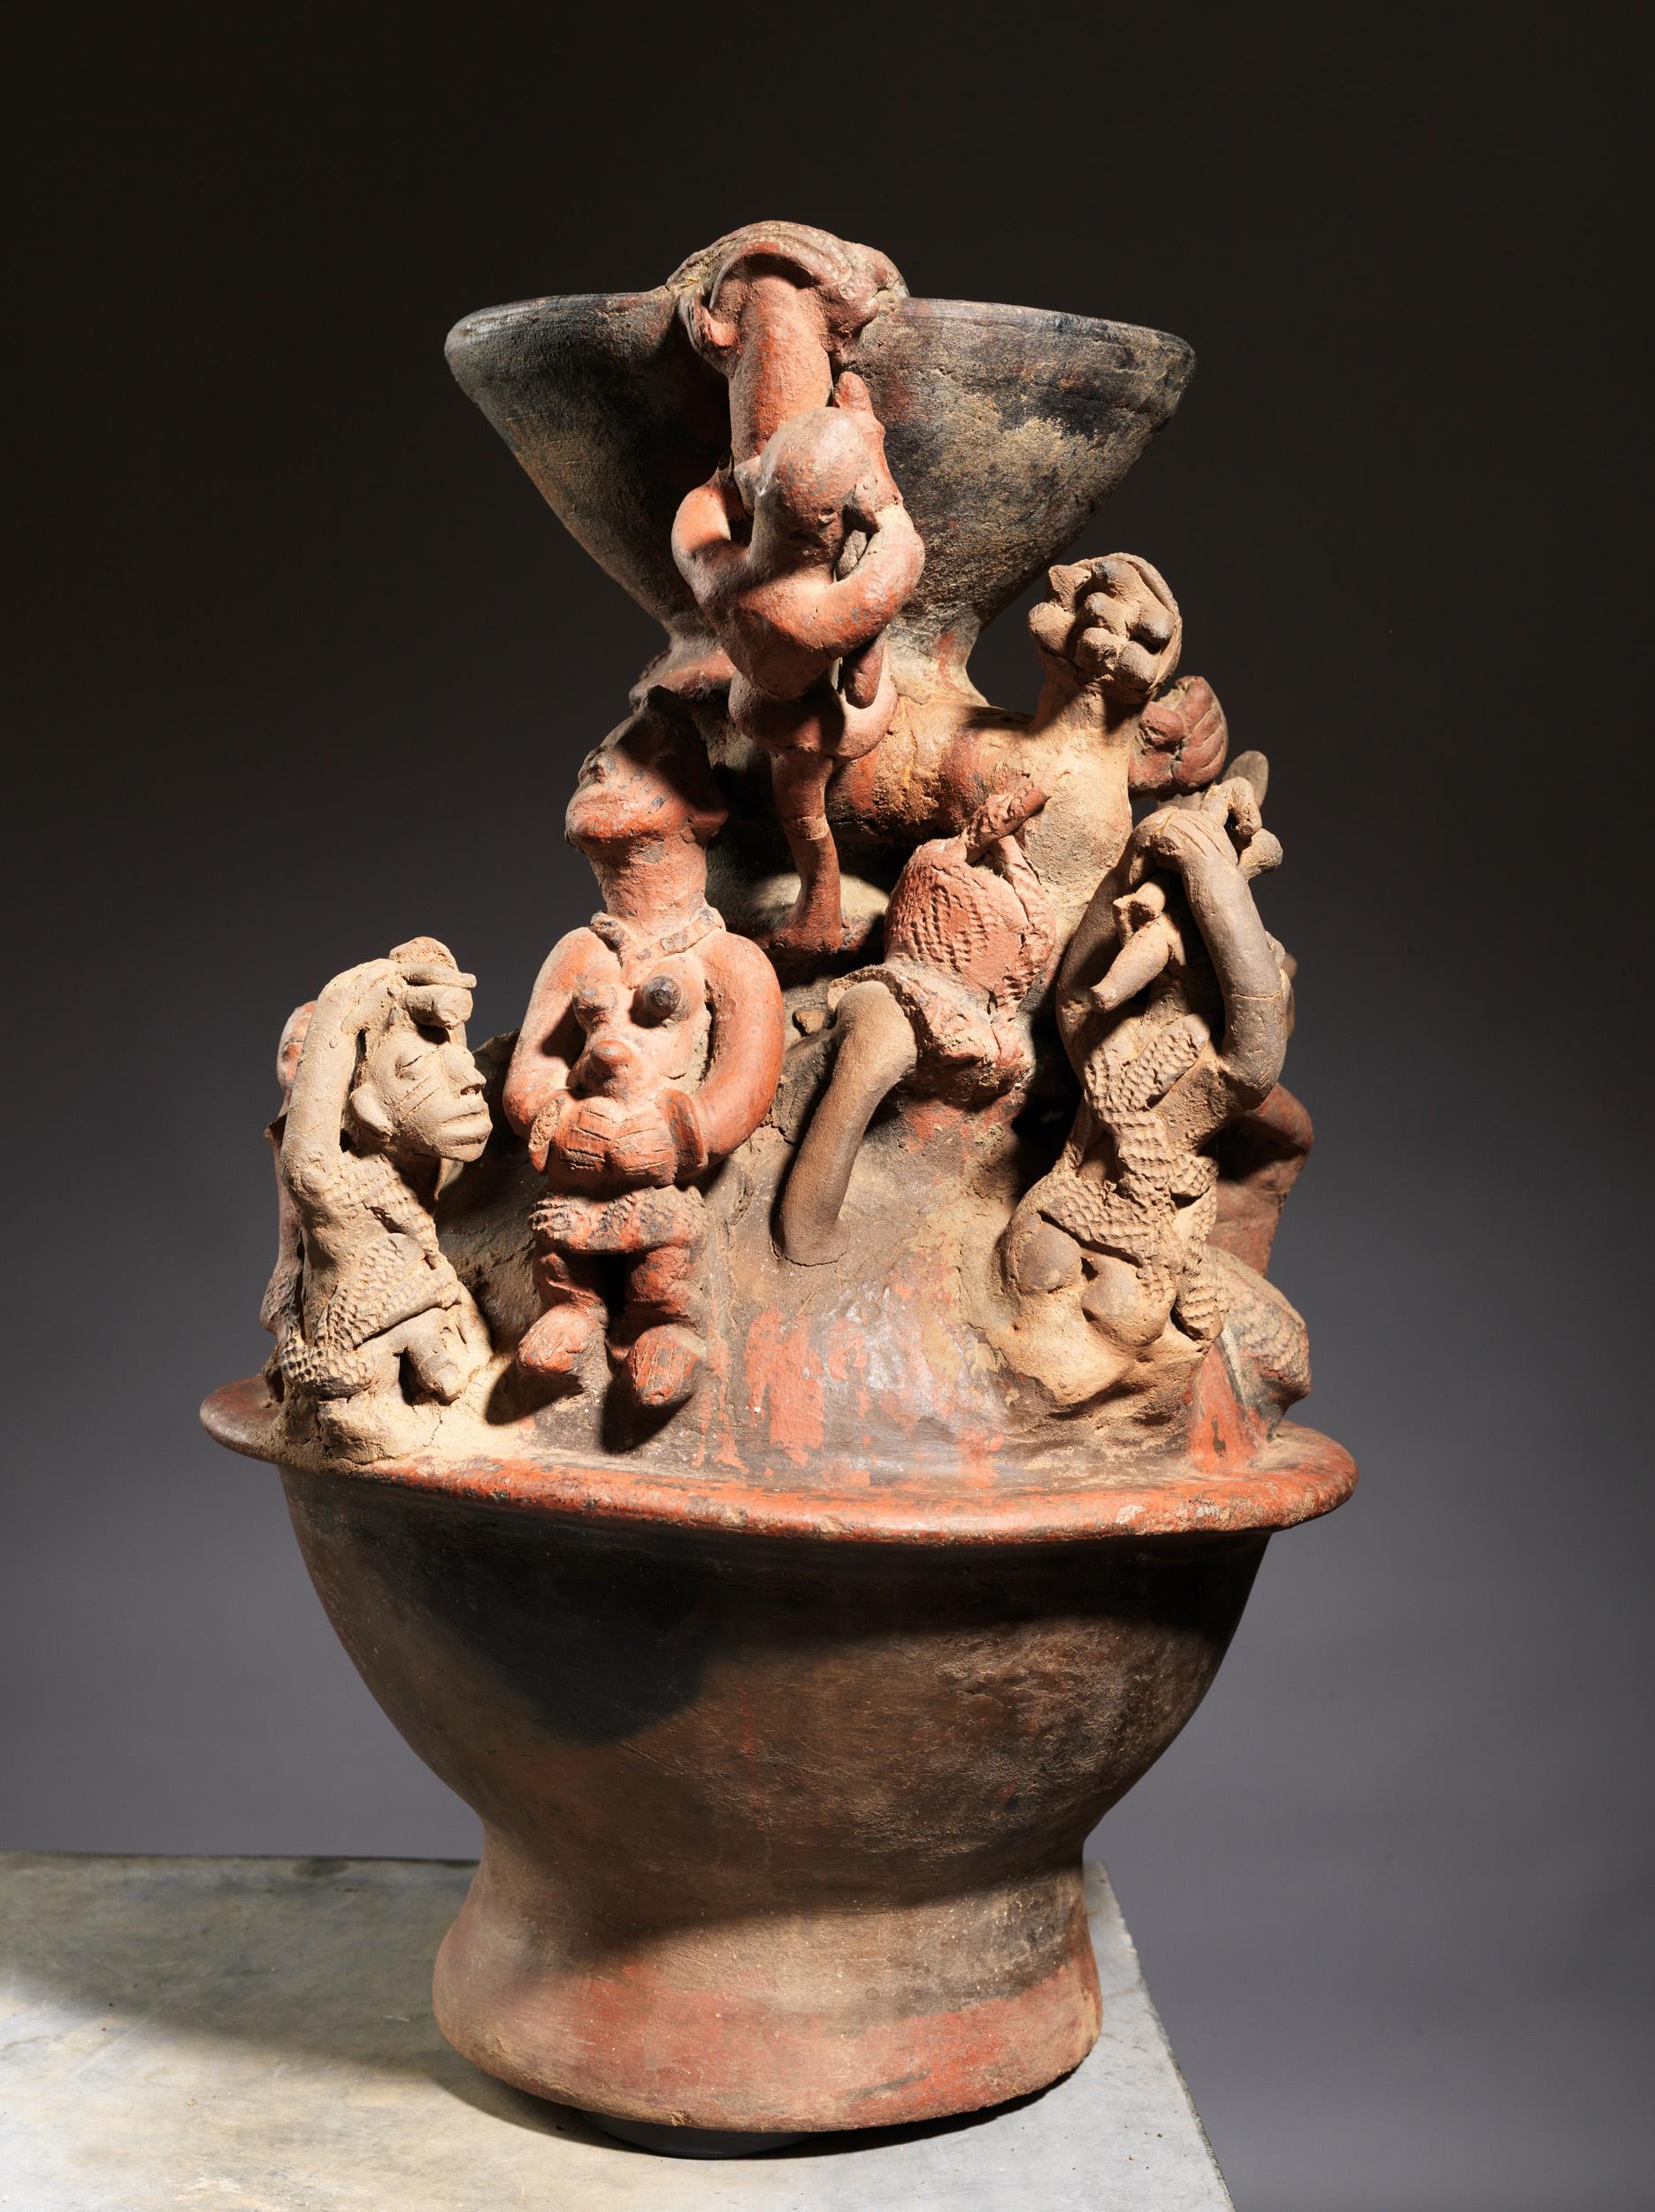 This piece of a pottery vessel, embellished with high relief figures, was made by women of the ethnic group of the Bariba (or Baatonu) in the northern provinces of Benin. The Bariba potters passed their trade from mother to daughter. They didn’t